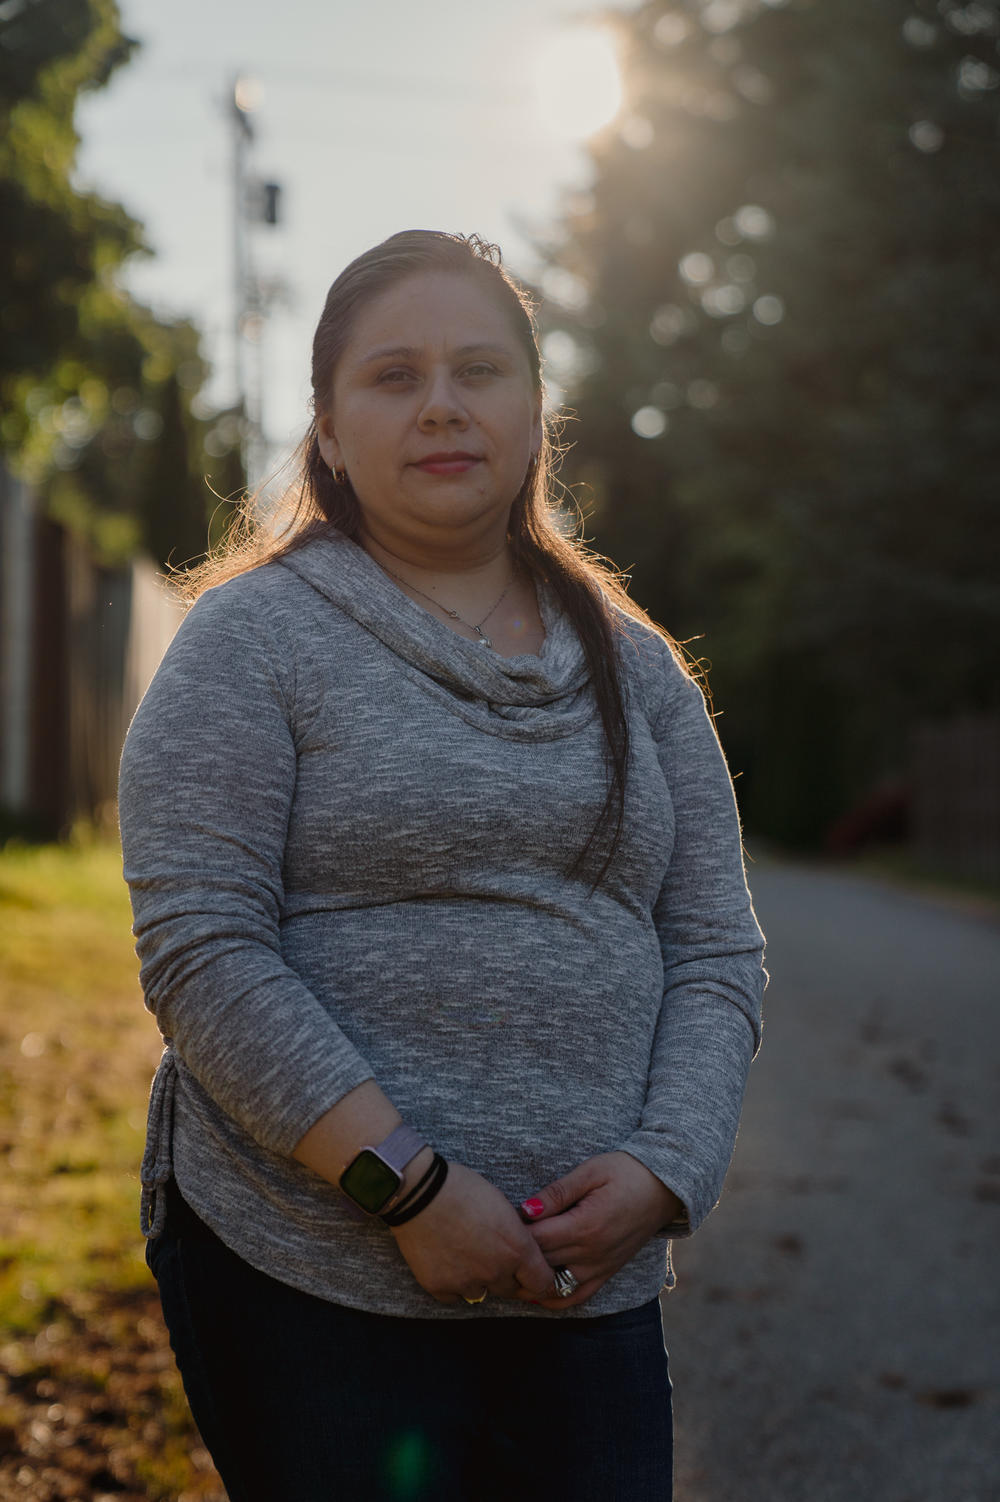 When Lopez signed up for classes back in March, her plan was to rely on Everett Community College's library to use a computer and access the internet. Then the pandemic happened.